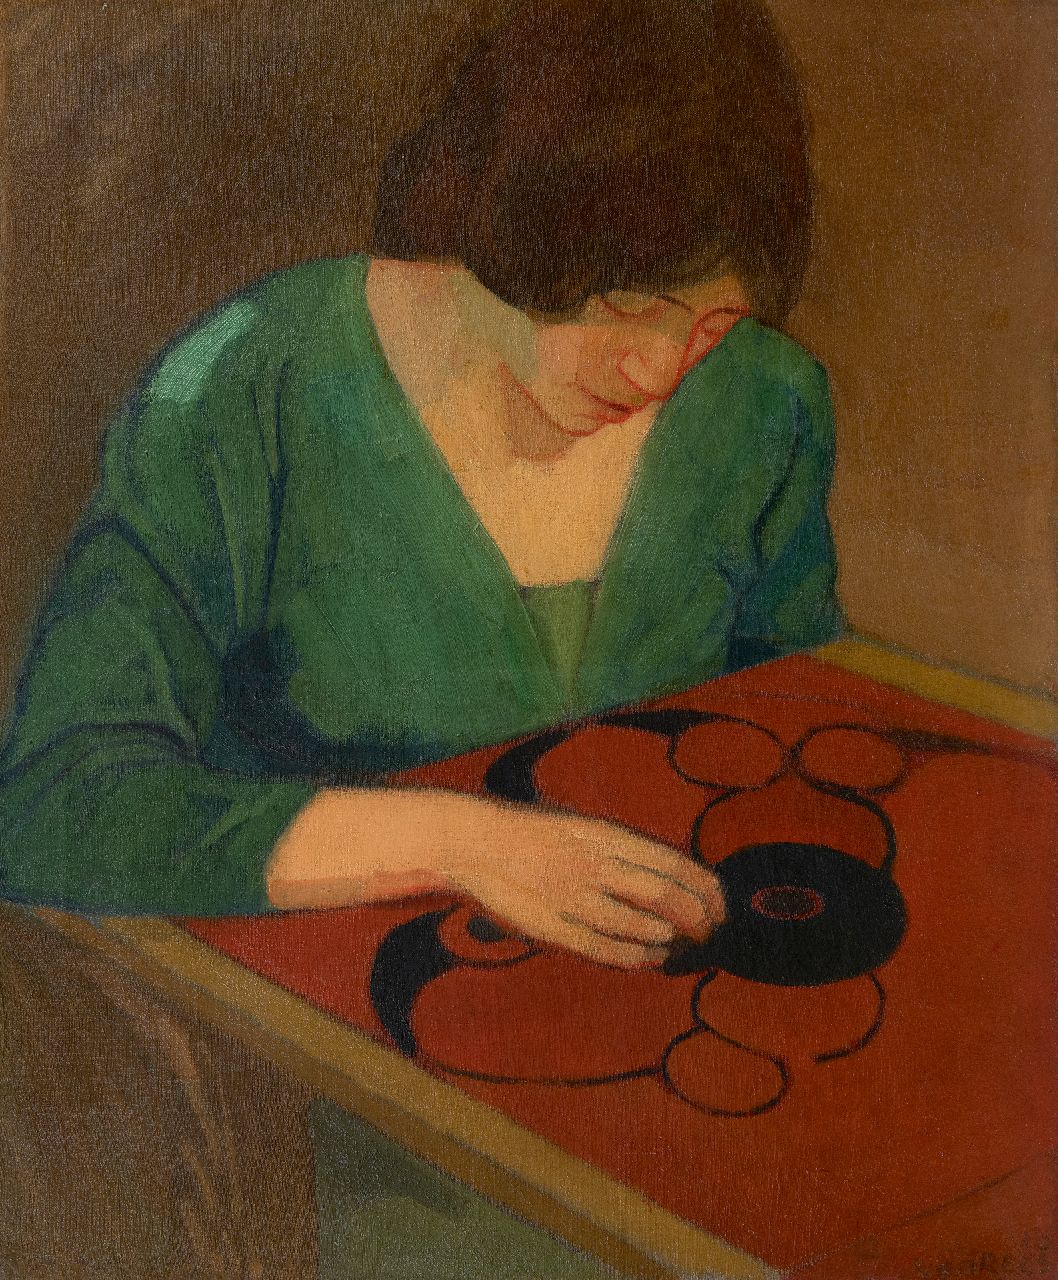 Rees O. van | Otto van Rees | Paintings offered for sale | Adya working on red embroidery, oil on canvas 65.2 x 54.0 cm, signed l.r. and dated 1910